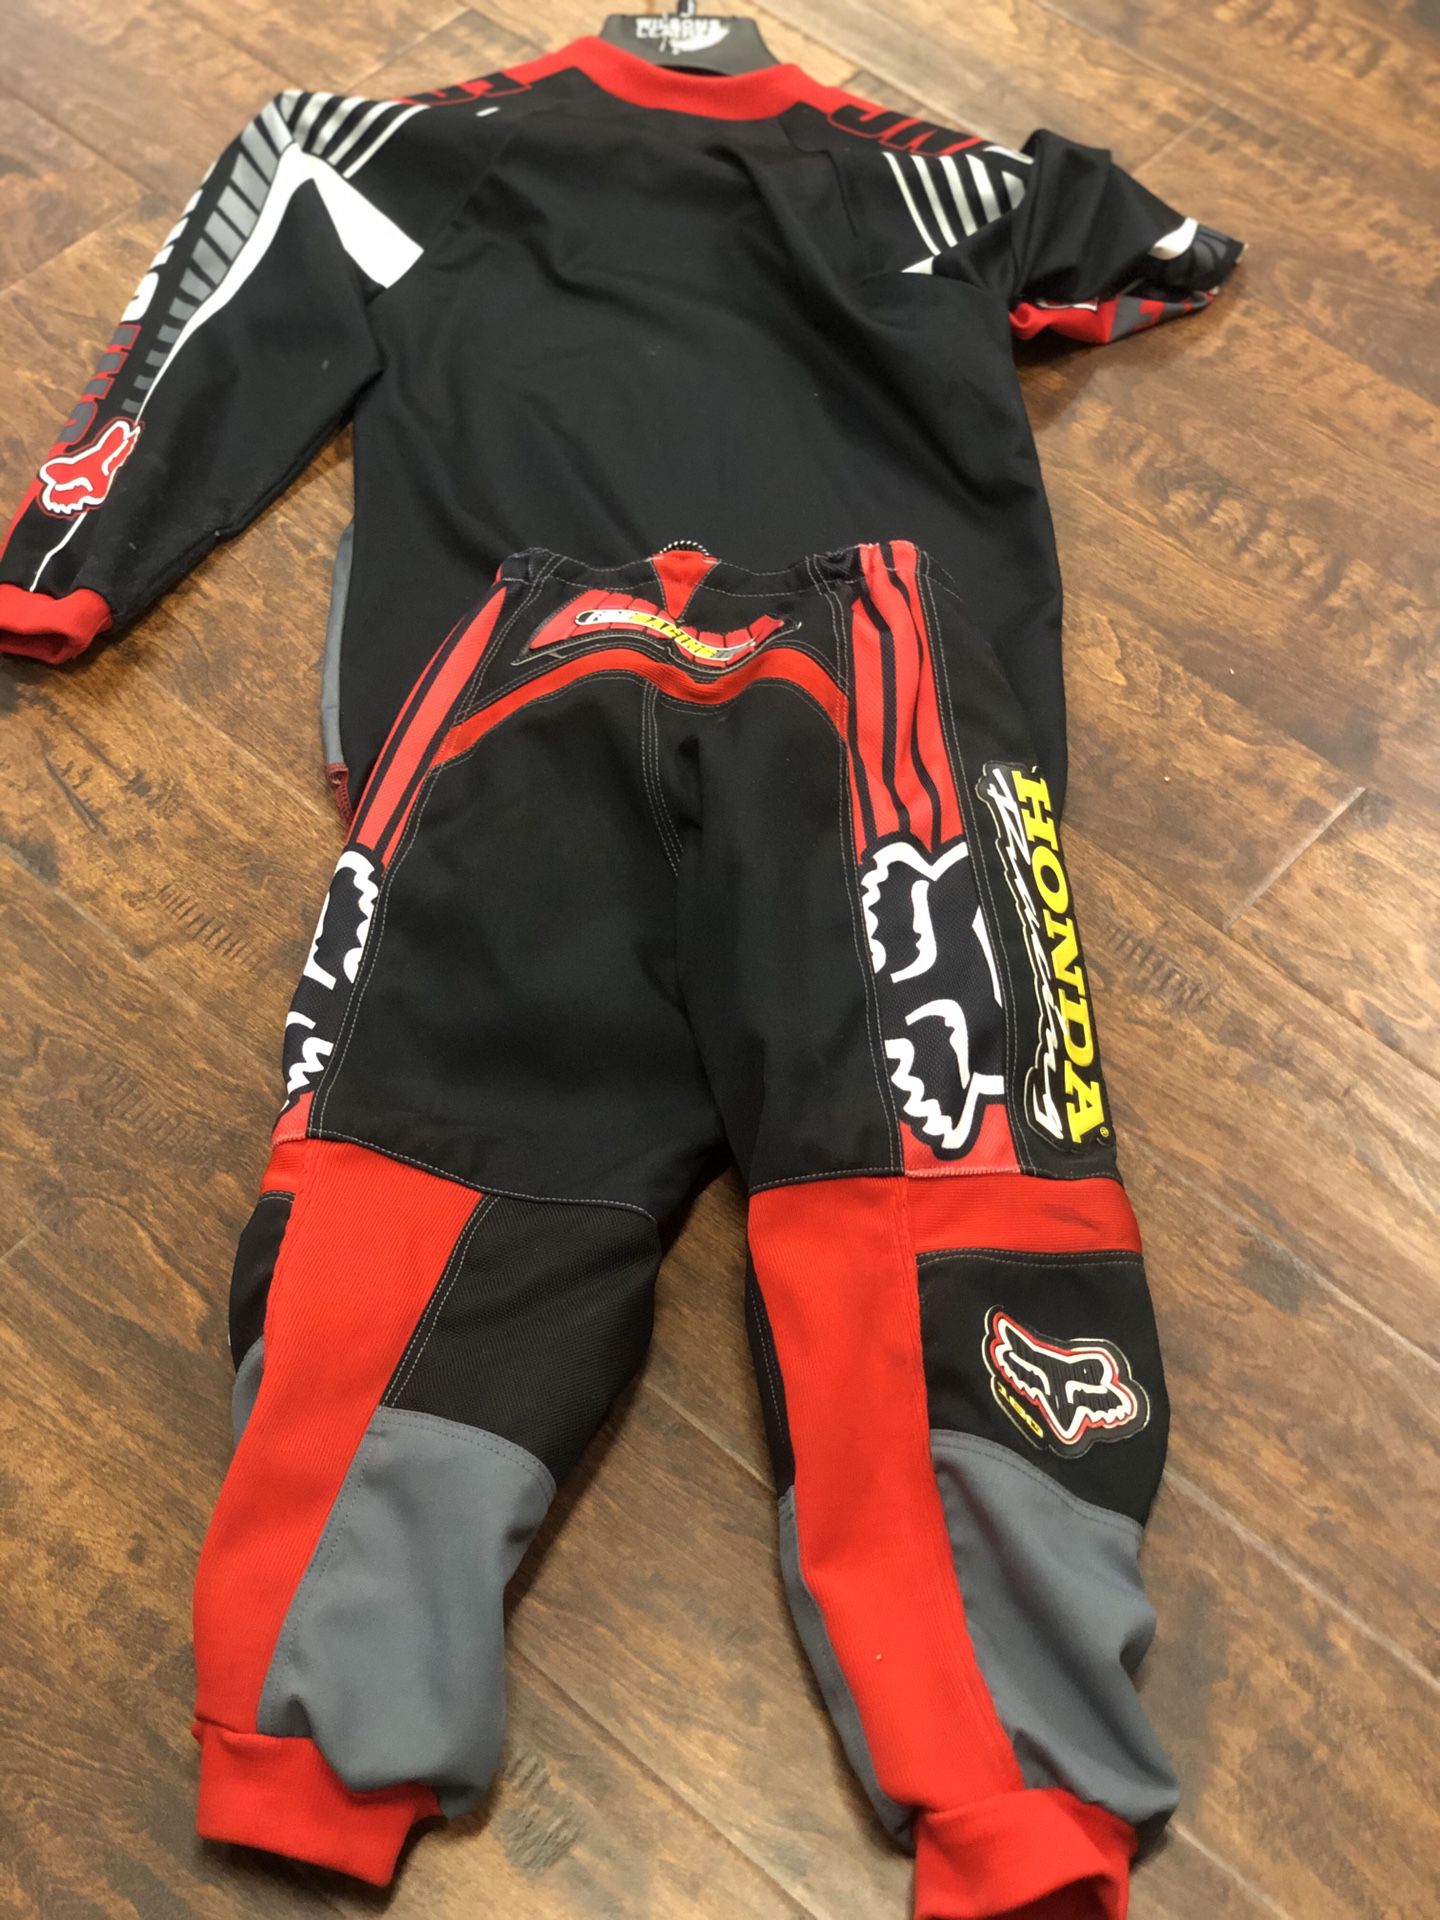 Fox HONDA motorcycle gear for kids pants, shirt, And a chest protector. SIZE M8